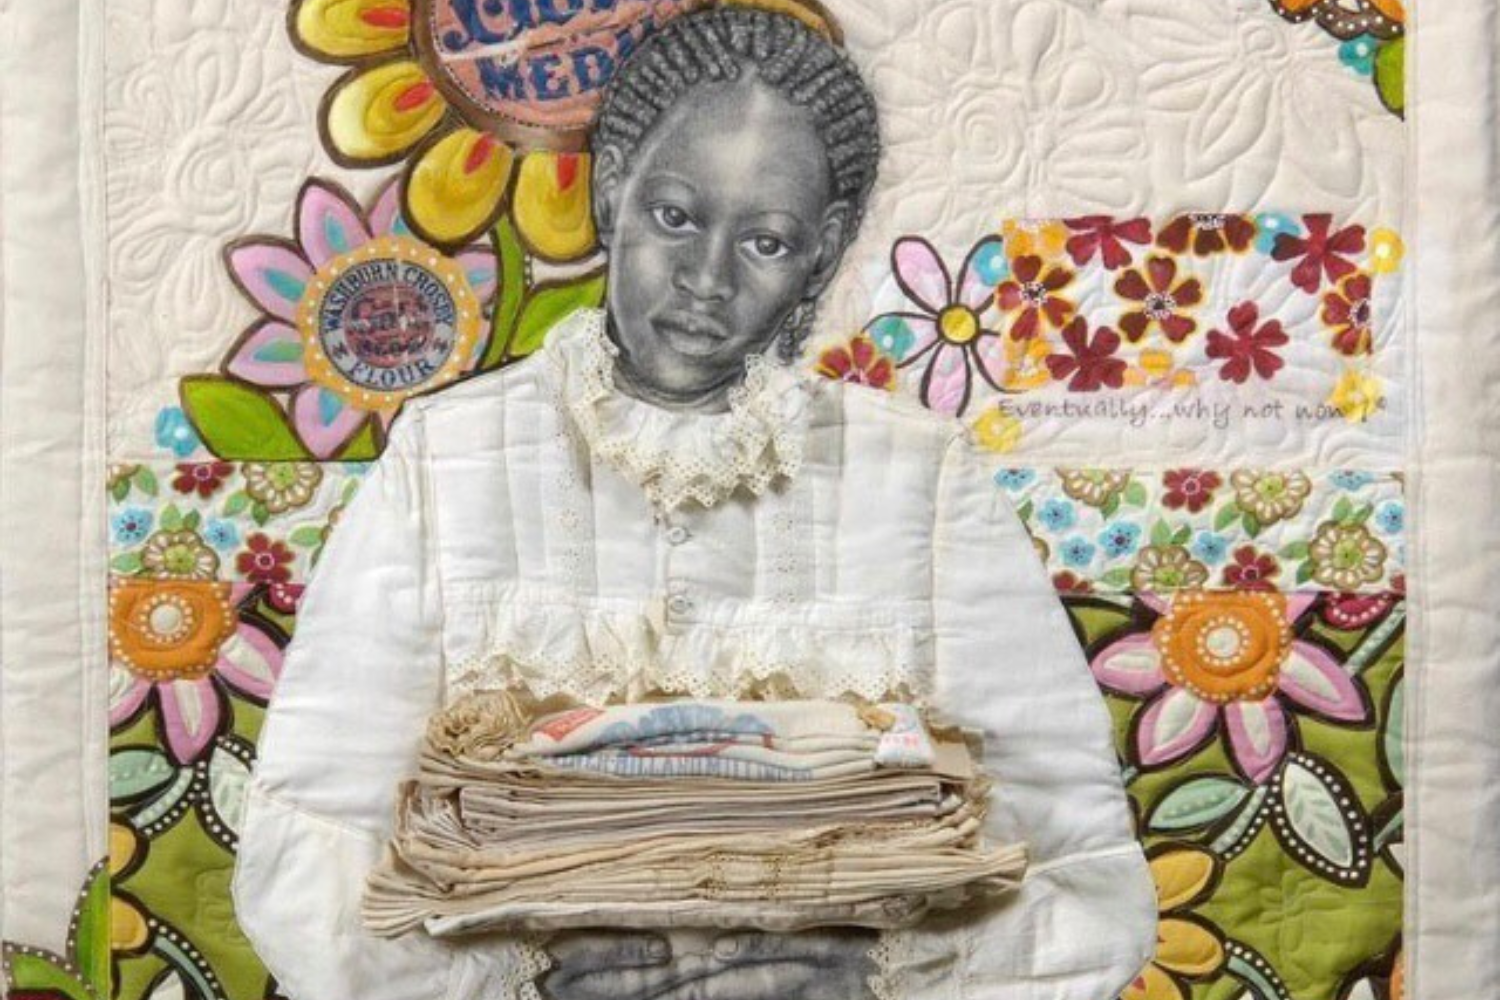 A quilt featuring a young Black woman looks at the camera and is wearing a white quilted dress with lace trim. She holds a stack of folded feed sacks. Behind her are pieces of flour feed sacks appliqued on the quilt, some with company logos, some with flower designs.